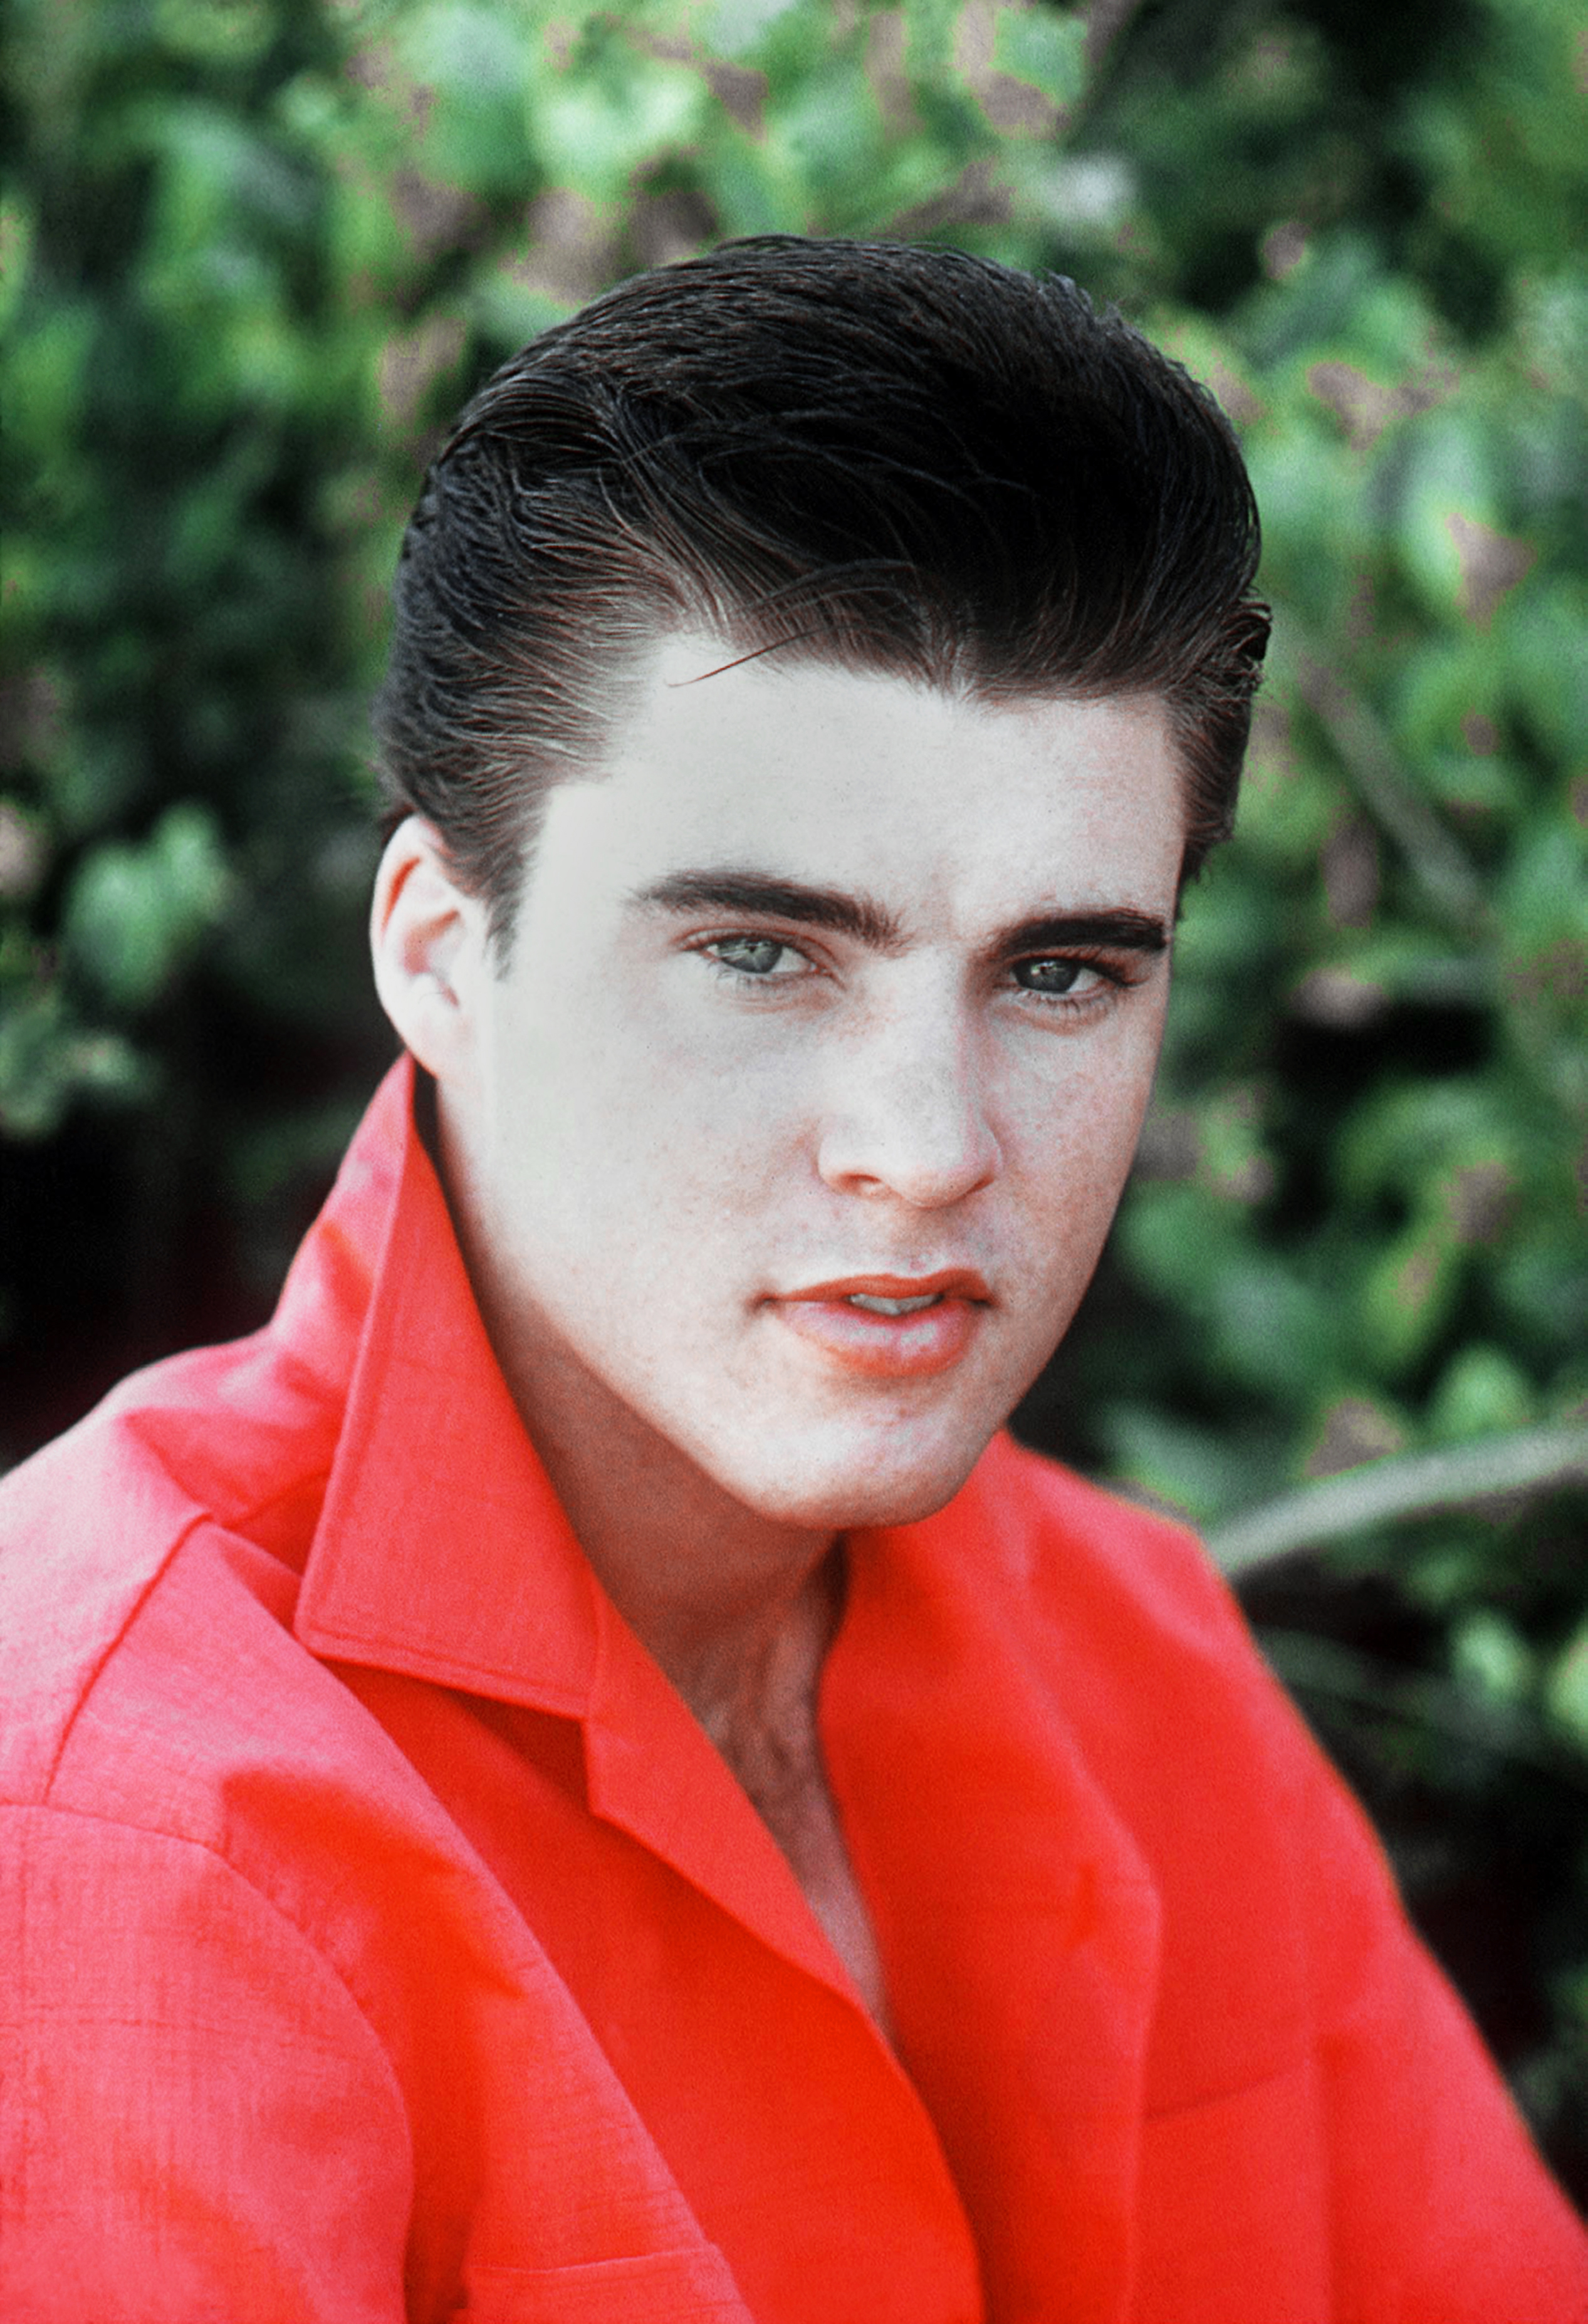 Actor and singer Ricky Nelson posing for a photo on May 17, 1958 in Los Angeles, California | Source: Getty Images